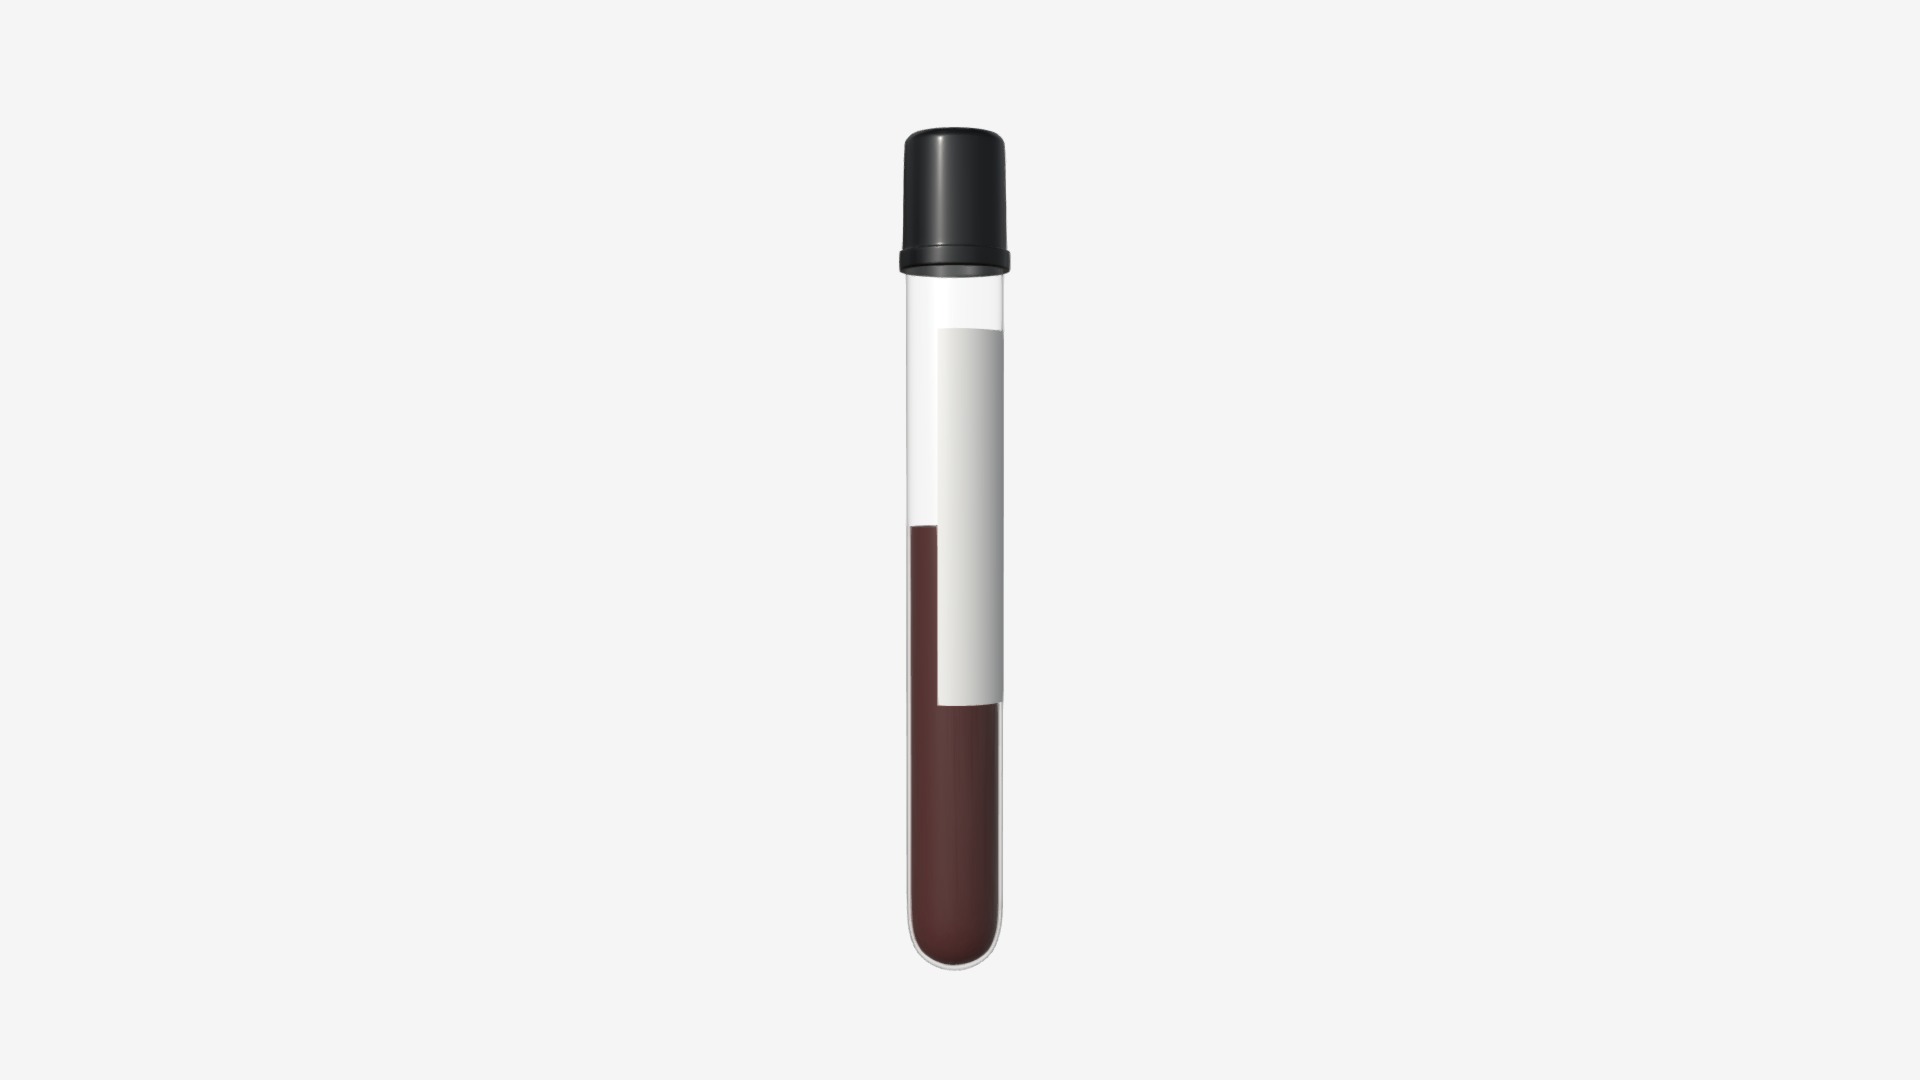 3D model test tube - This is a 3D model of the test tube. The 3D model is about a black and red pen.